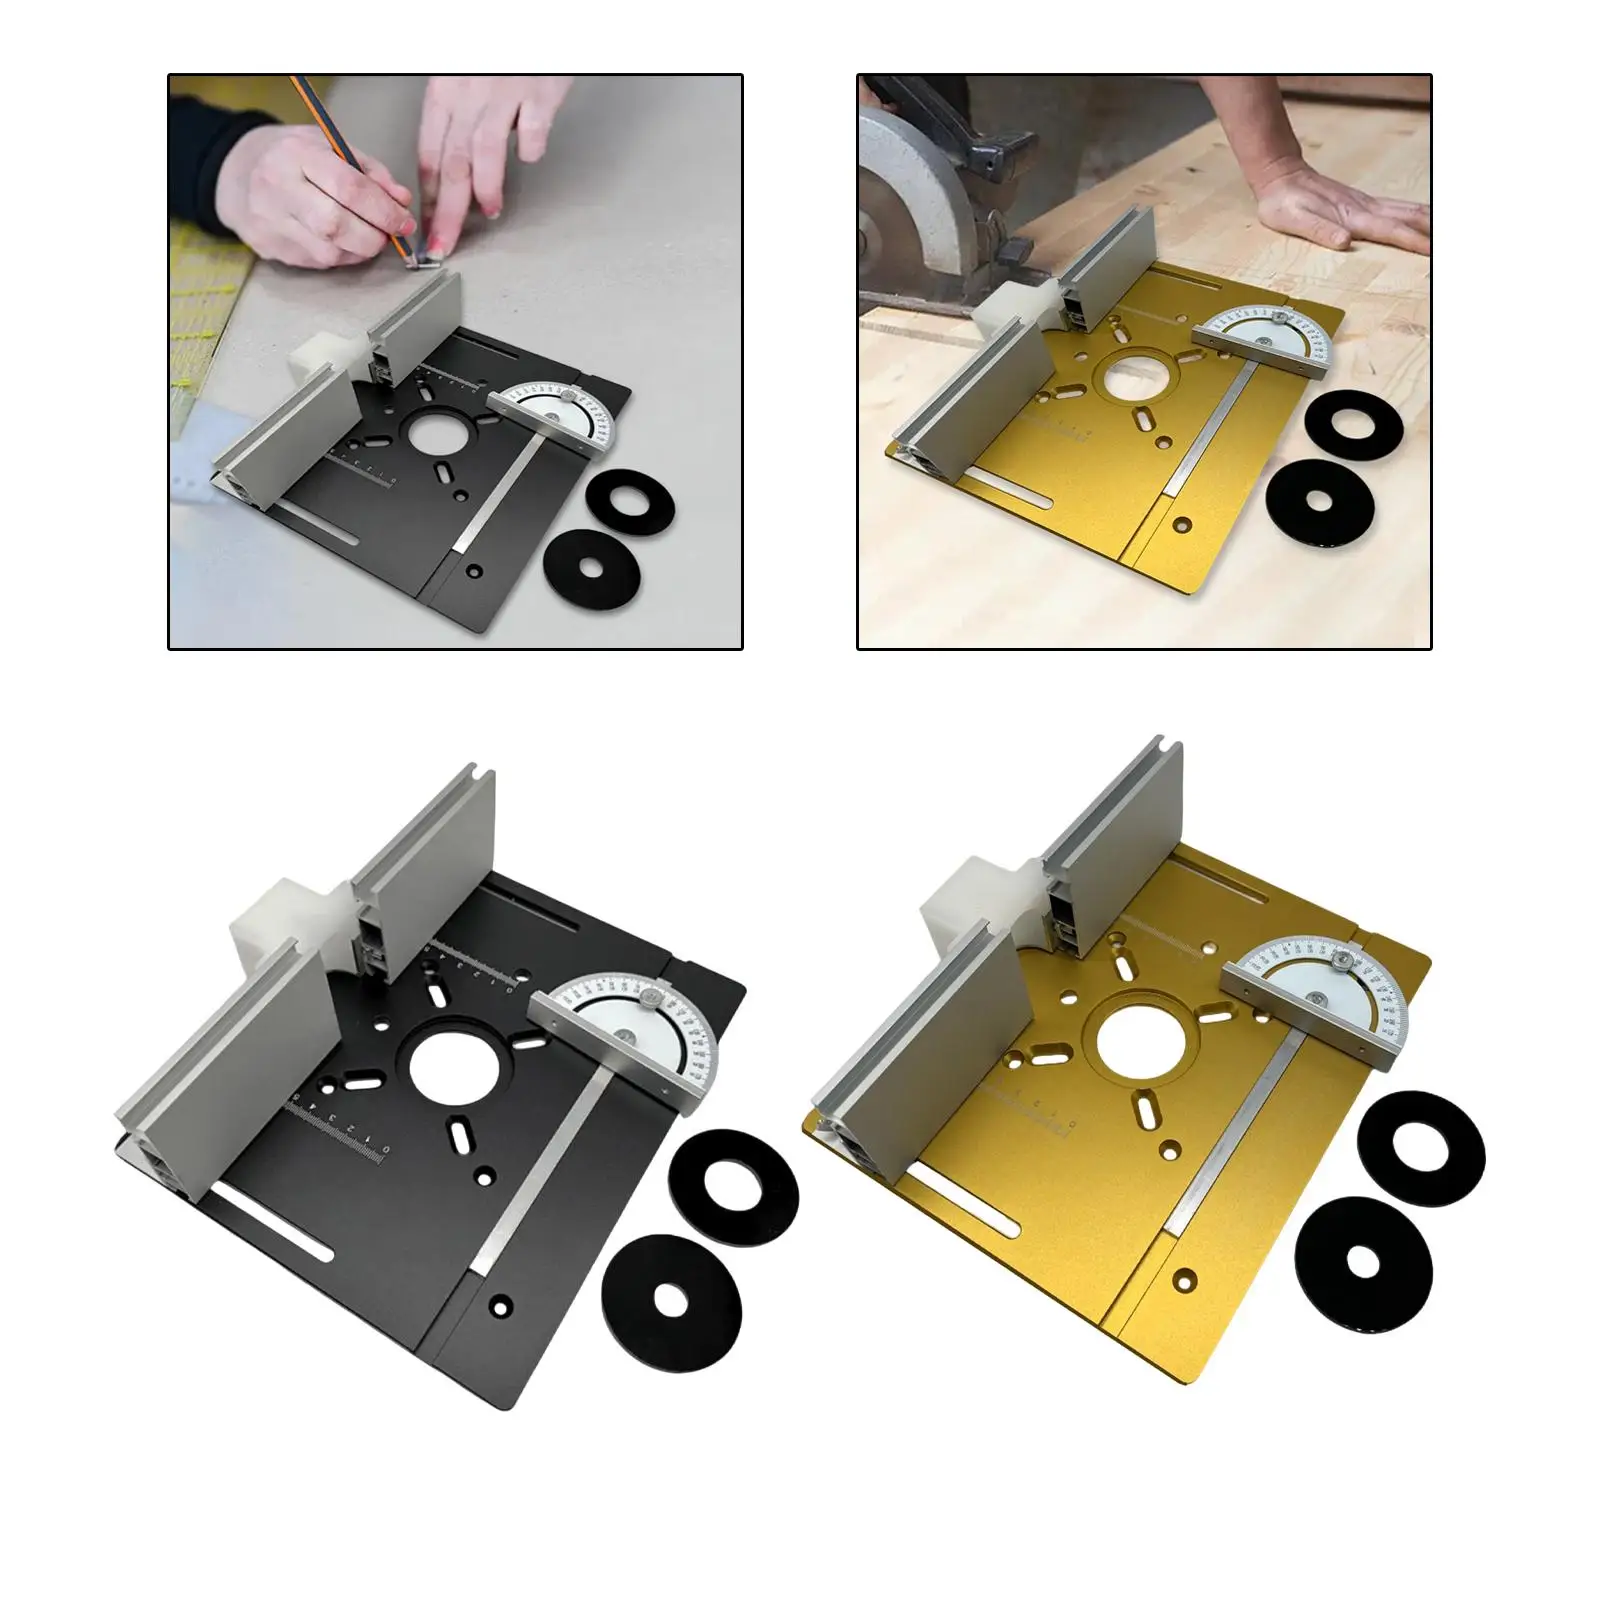 Aluminium Alloy Router Table Insert Plate Easy to Use Woodworking Bench Table for trimming Routers Wood Trimming Milling Tool